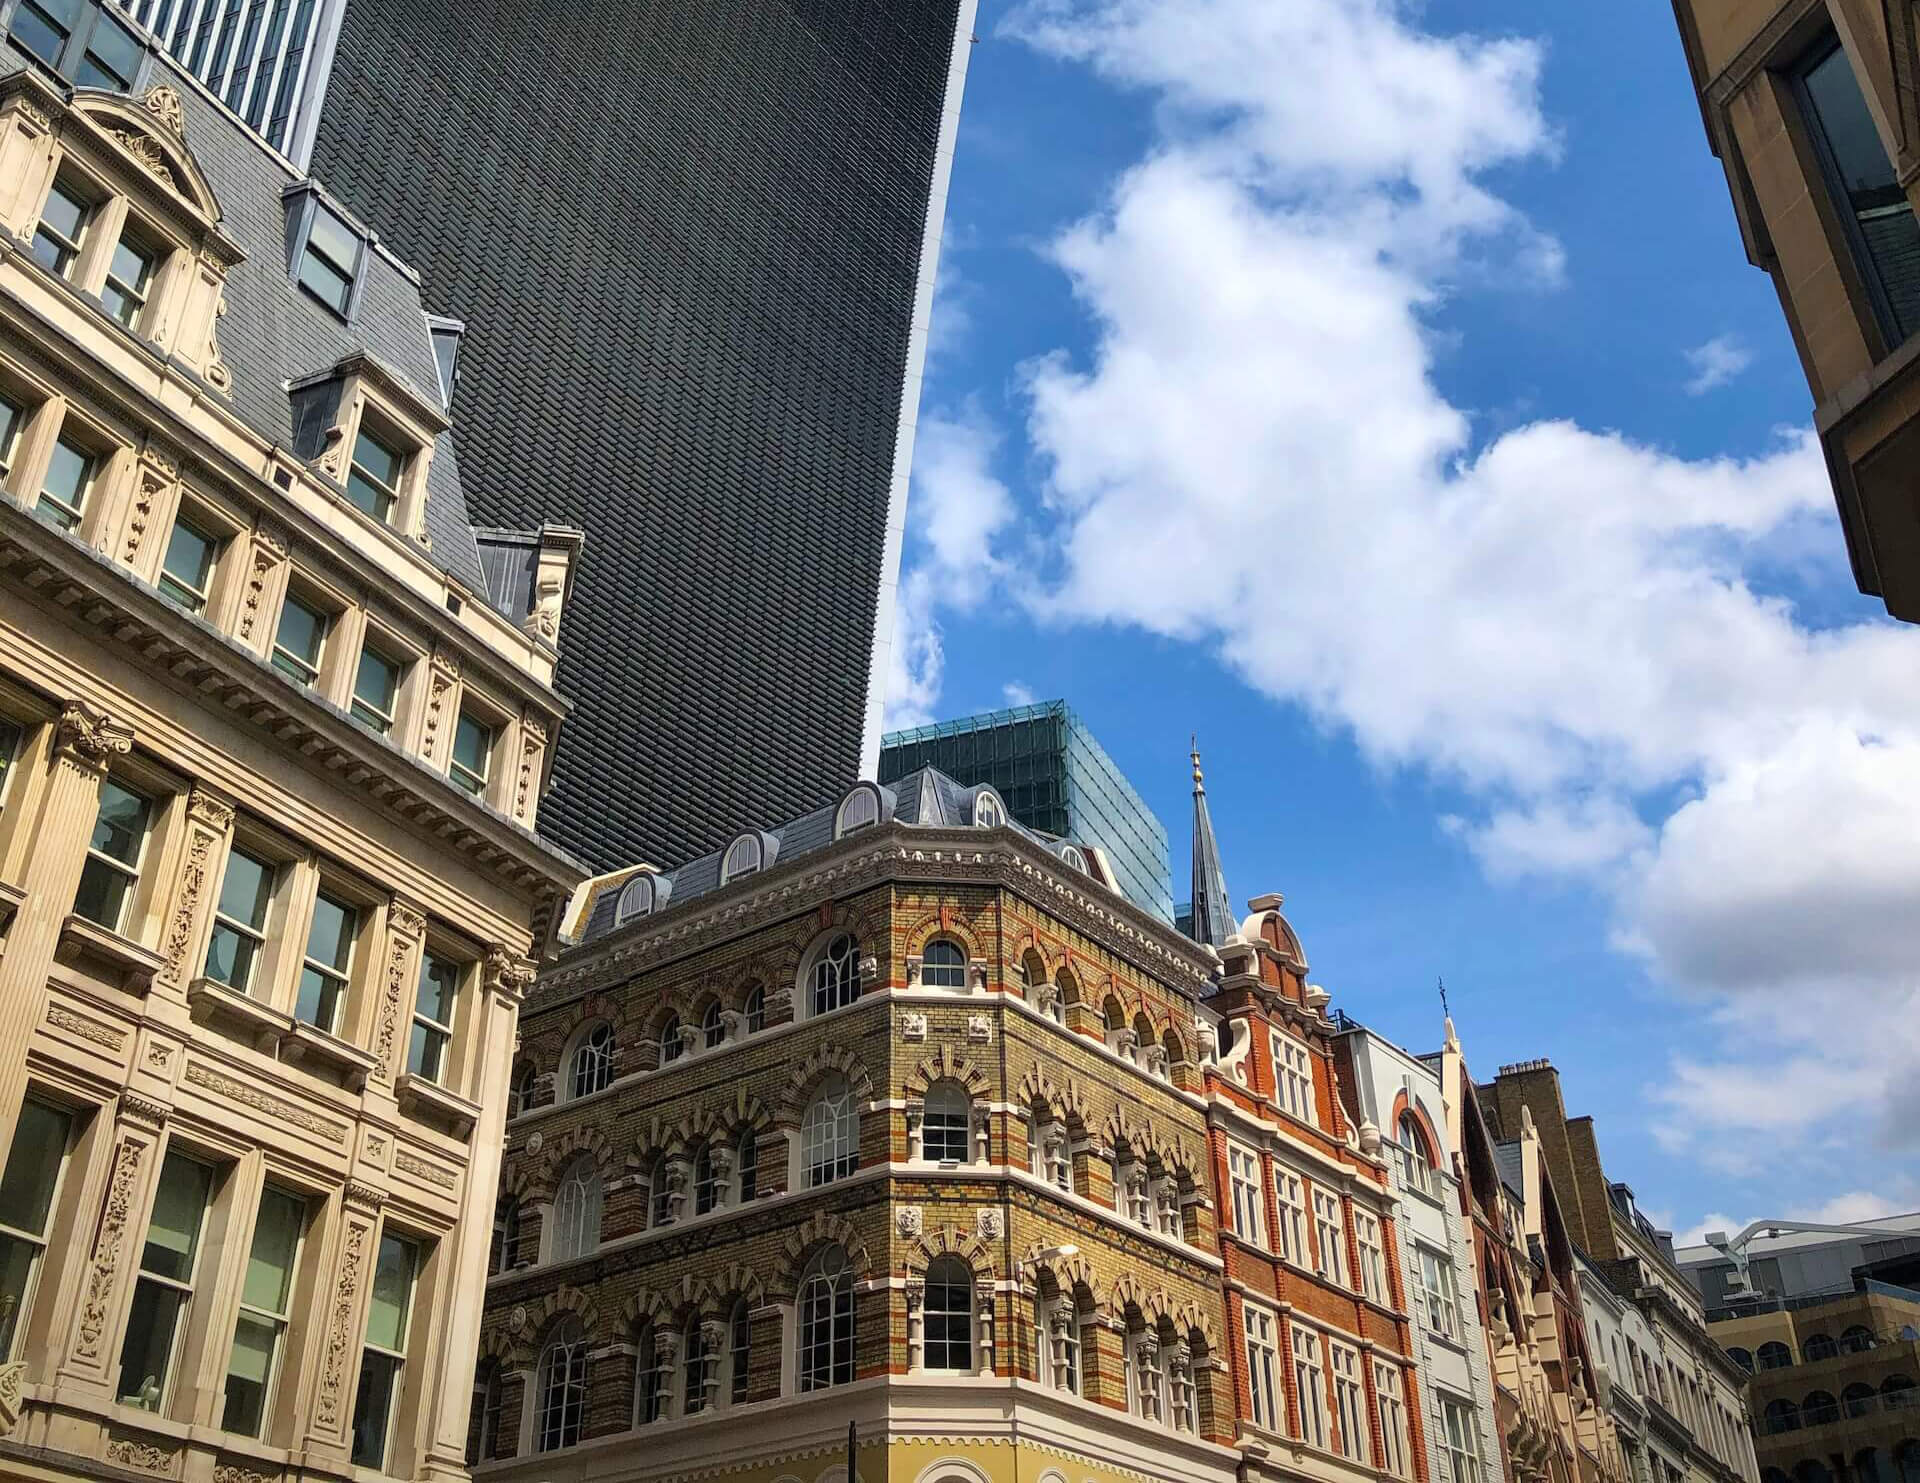 Image of buildings in London with tall skyscraper and sky in the background